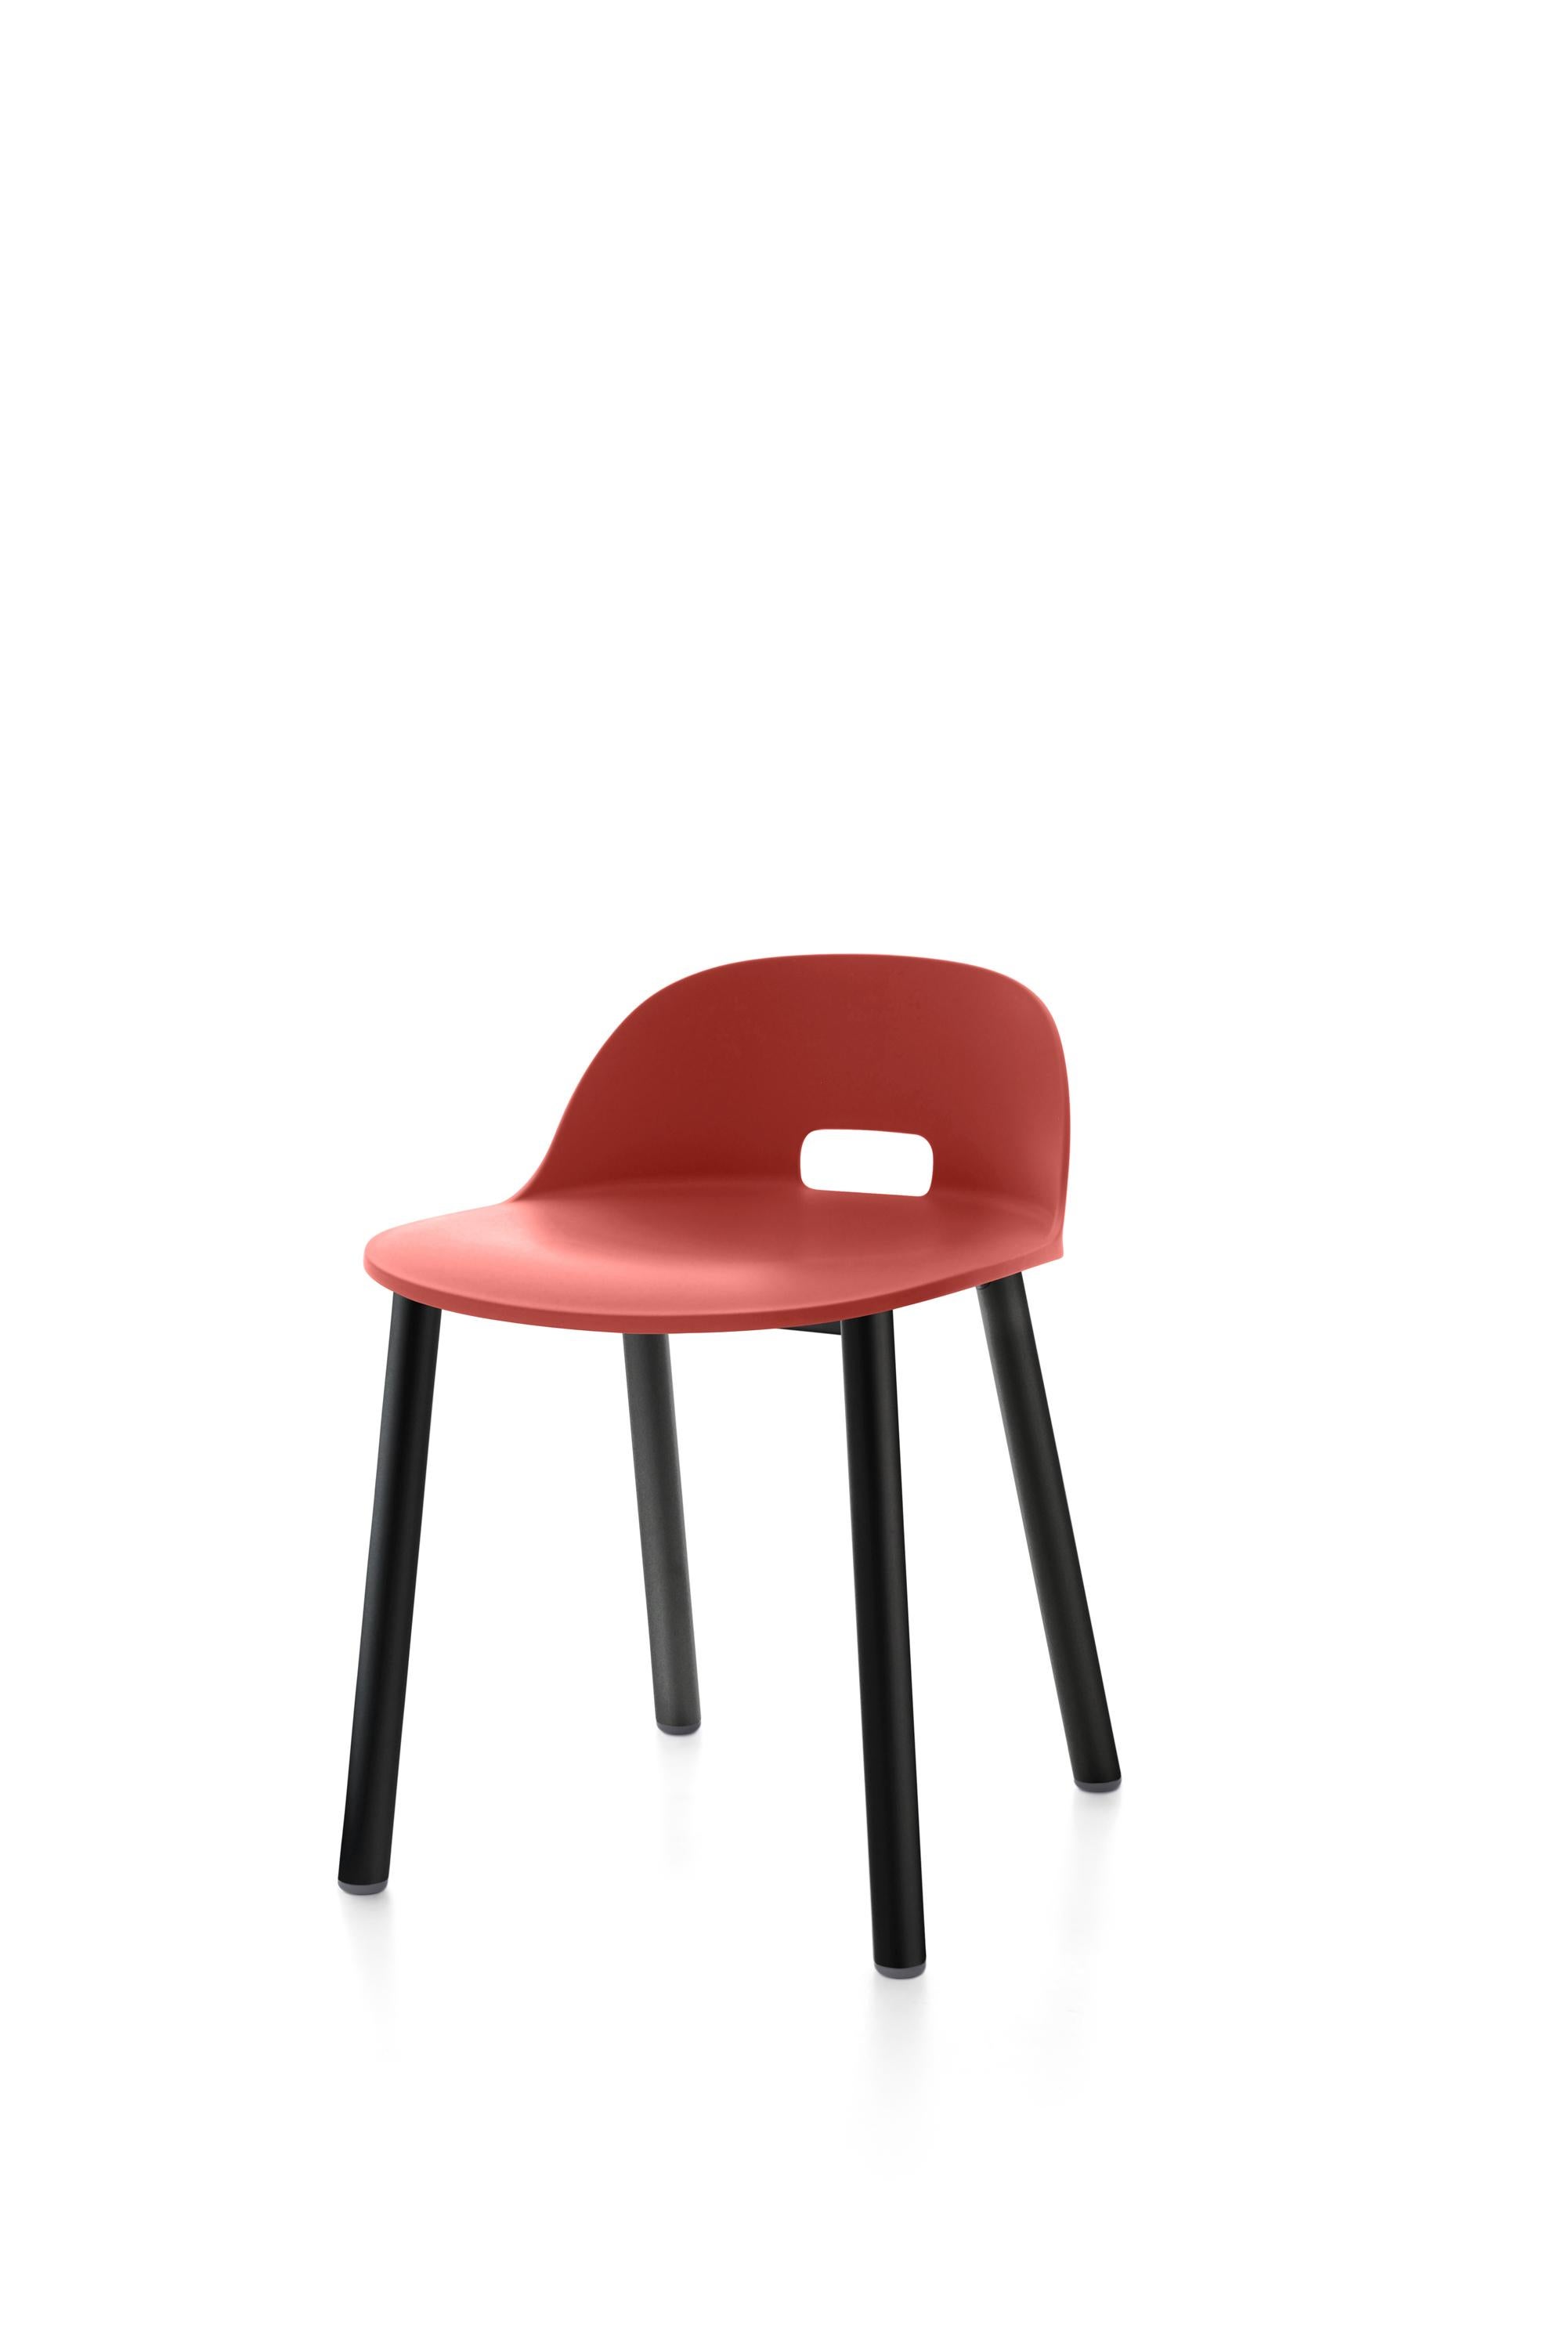 For Sale: Red (Alfi Red) Emeco Alfi Low Back Chair with Black Powder-Coated Aluminum Frame by Jasper